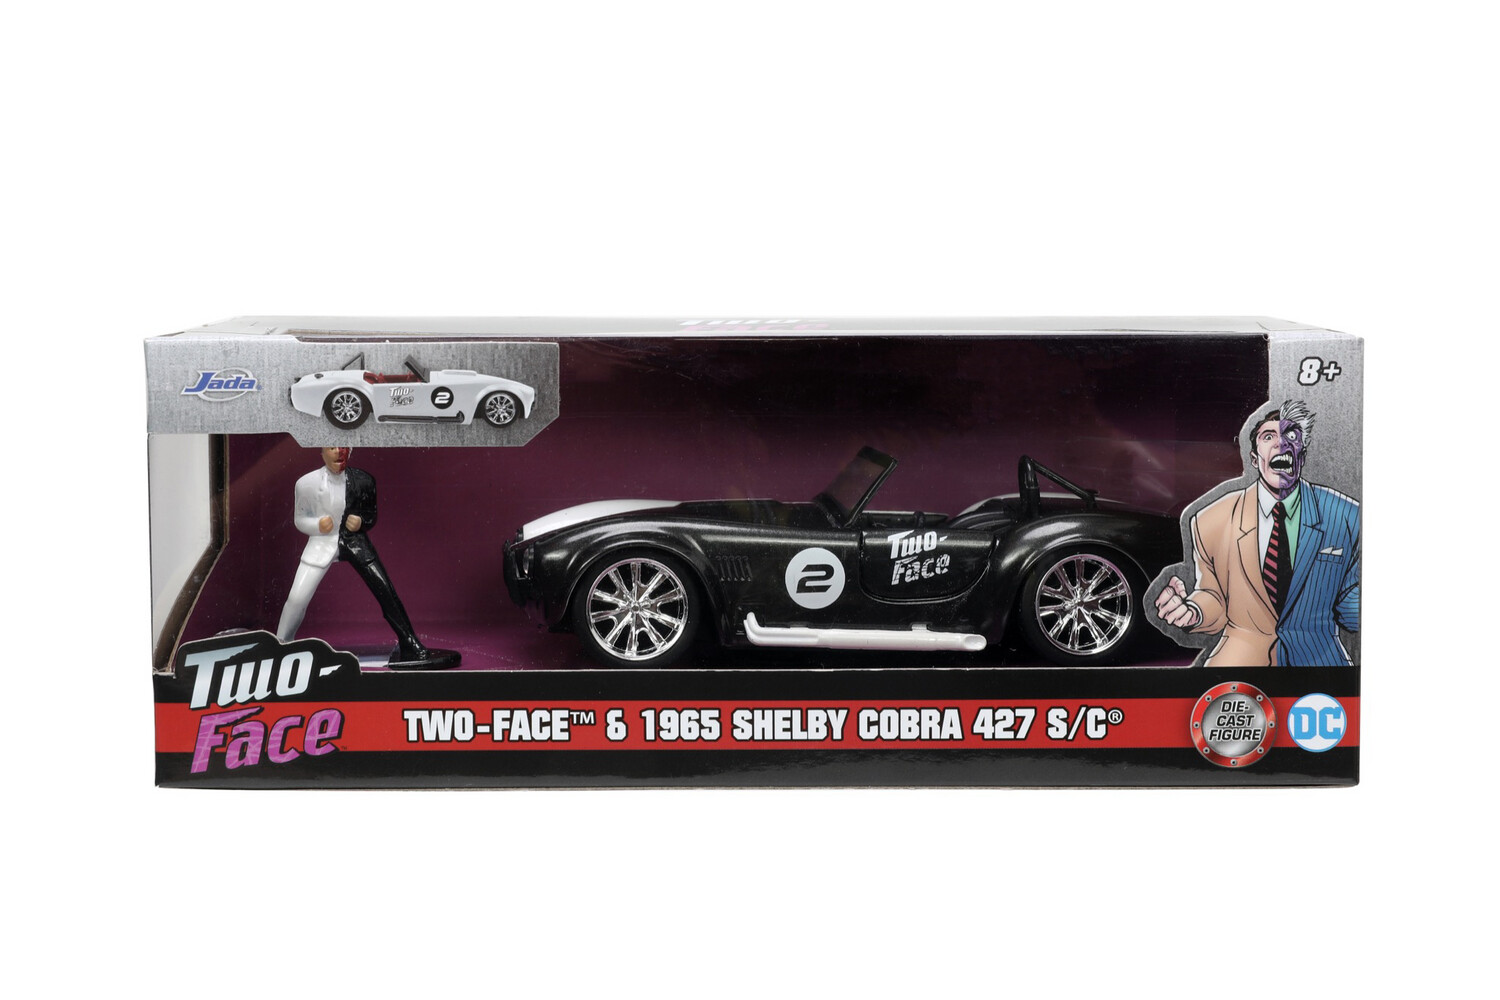 1965 Shelby Cobra & Two - Face